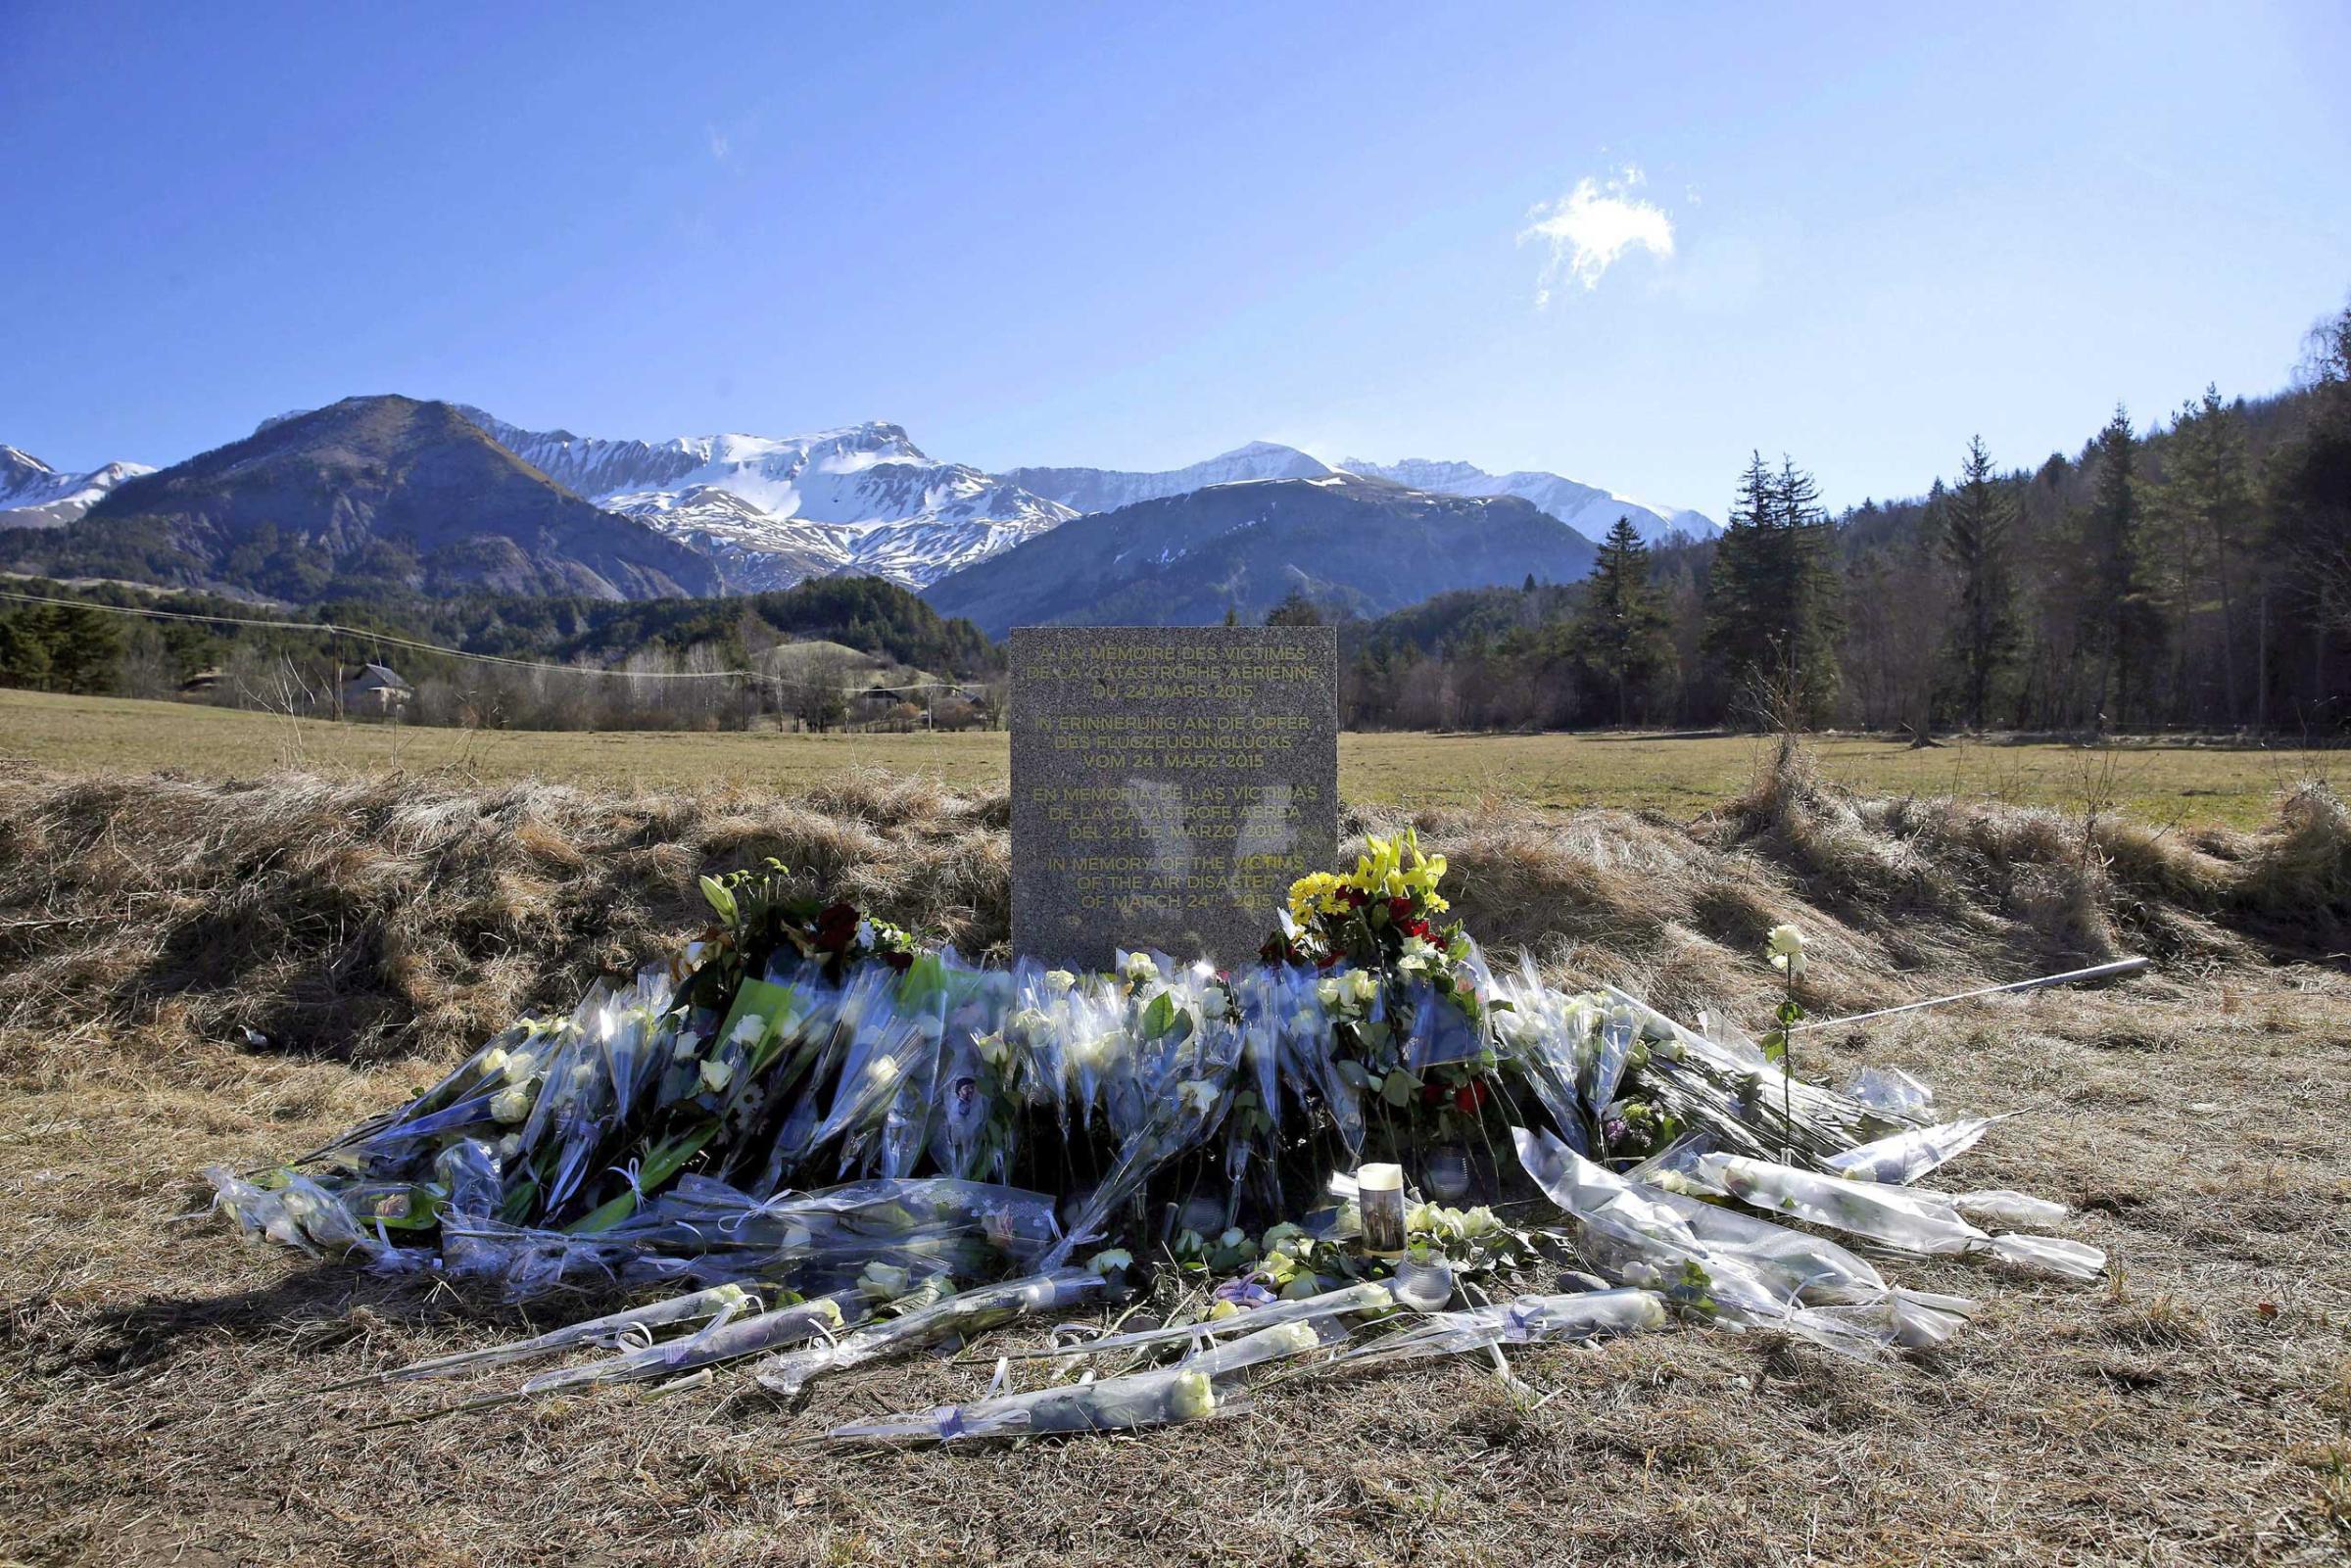 Flowers are left in front of the monument in homage to the victims of Germanwings Flight 4U 9525 in Le Vernet, southeastern France, March 27, 2015.